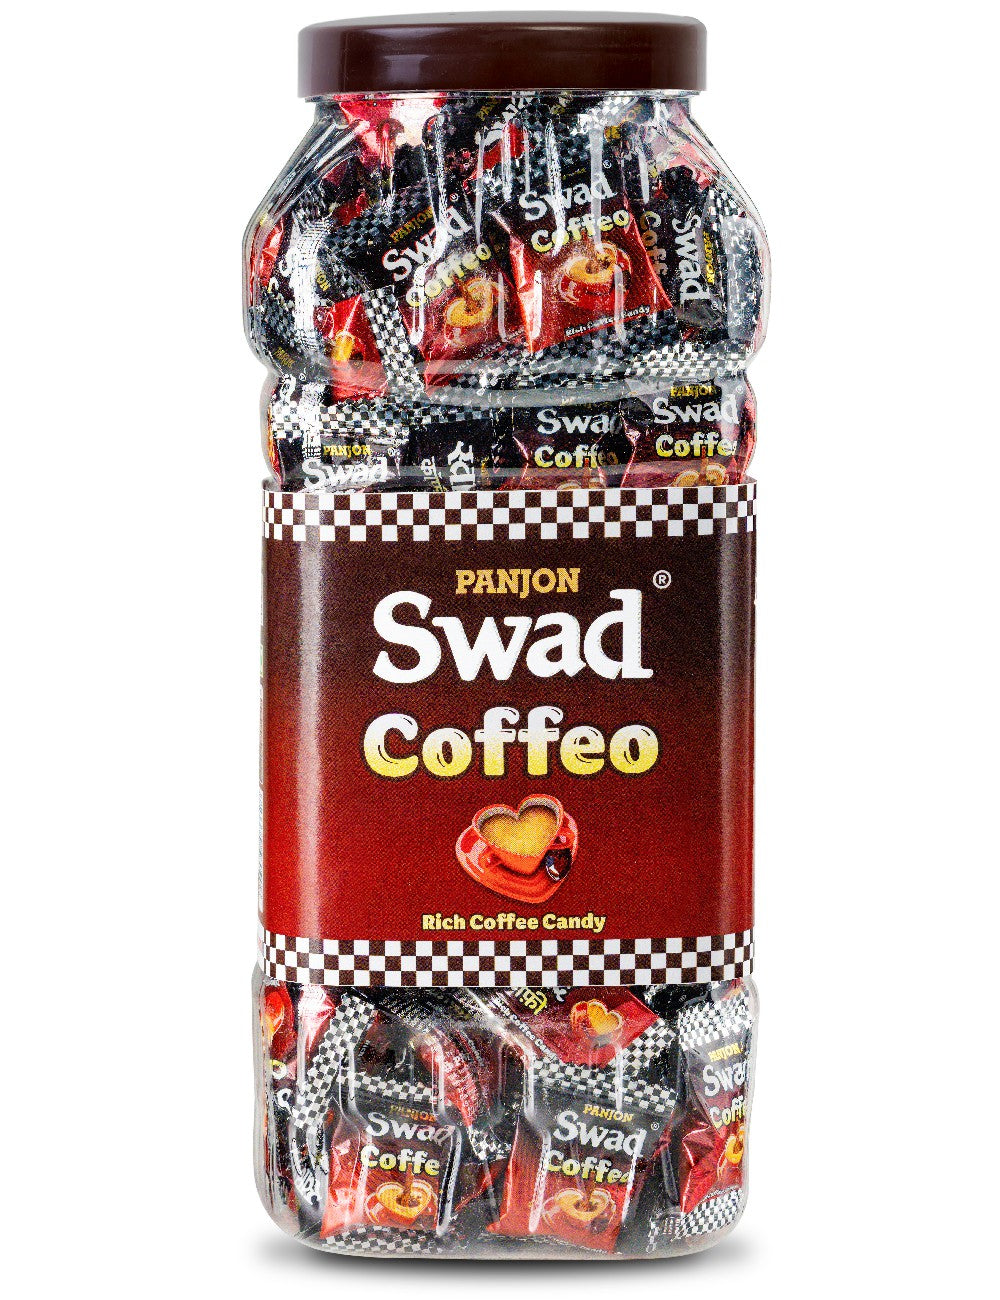 Swad Coffee Candy (Made with Strong Coffee Beans Kopiko Toffee) Jar, 500g